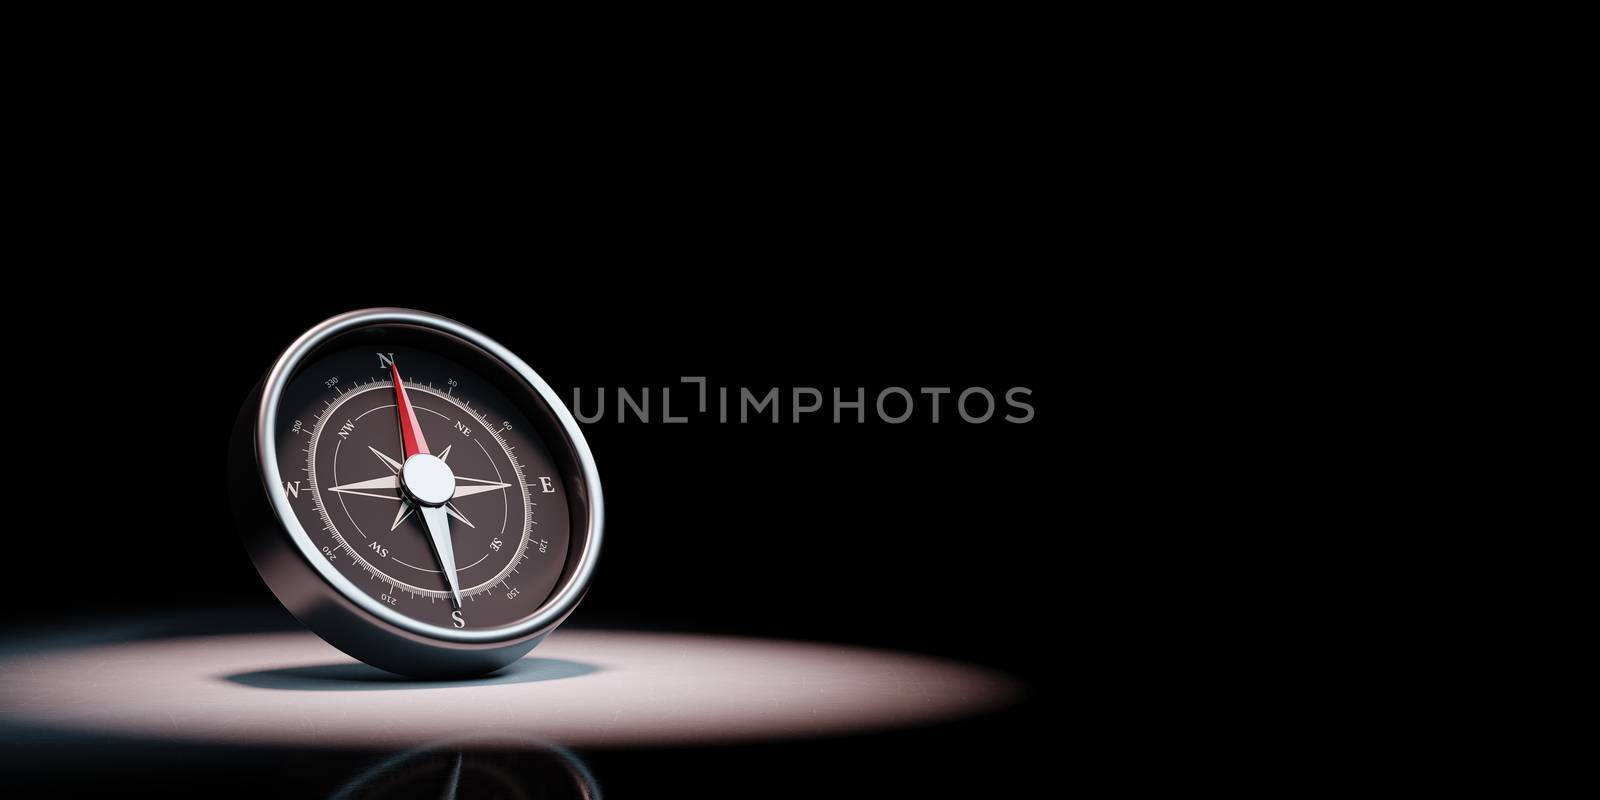 Compass Spotlighted on Black Background by make